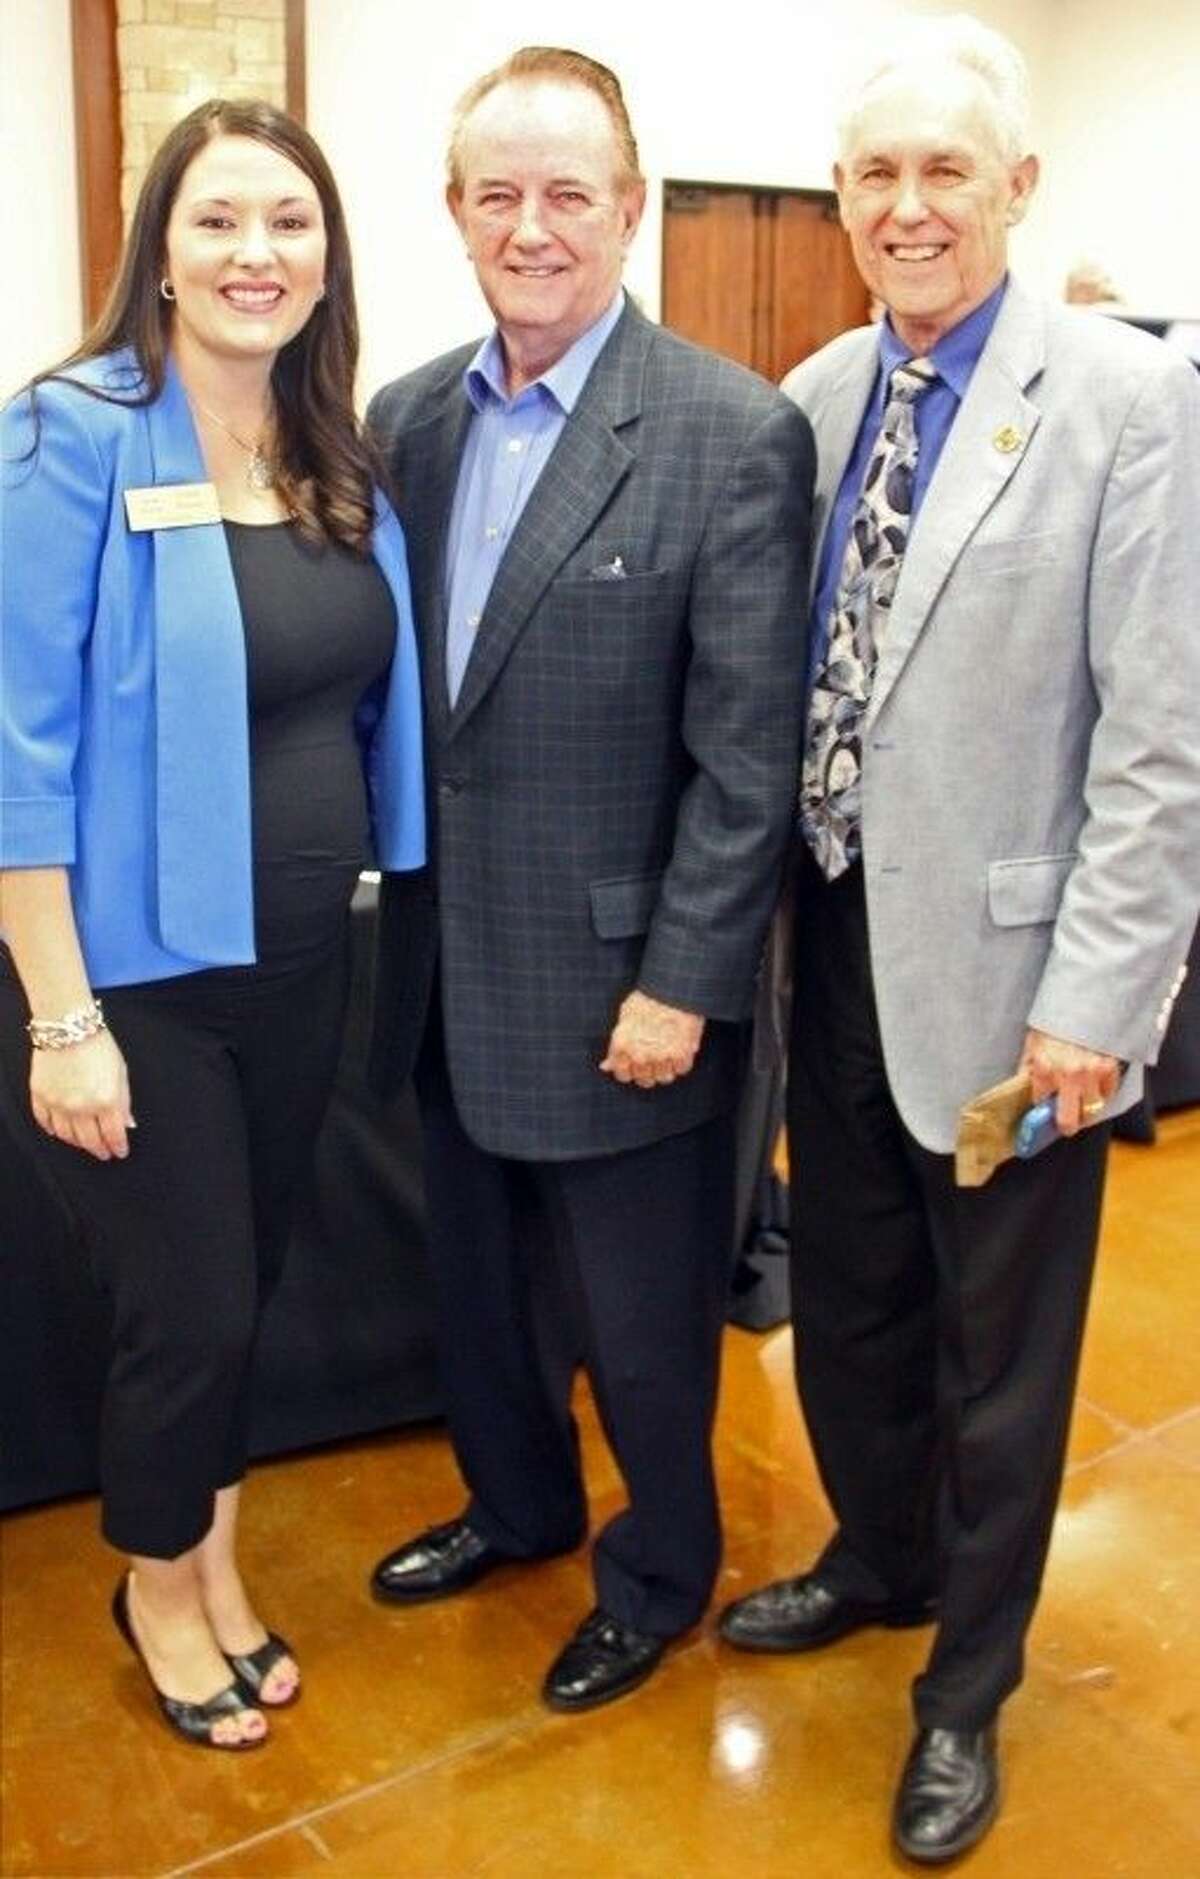 Cristina Womack, the Pasadena Chamber of Commerce President, pictured with Mayor Johnny Isbell and  Richard Scott, the former community relations director. Womack says publicity about Pasadena's voting rights issues has not harmed the chamber's work.